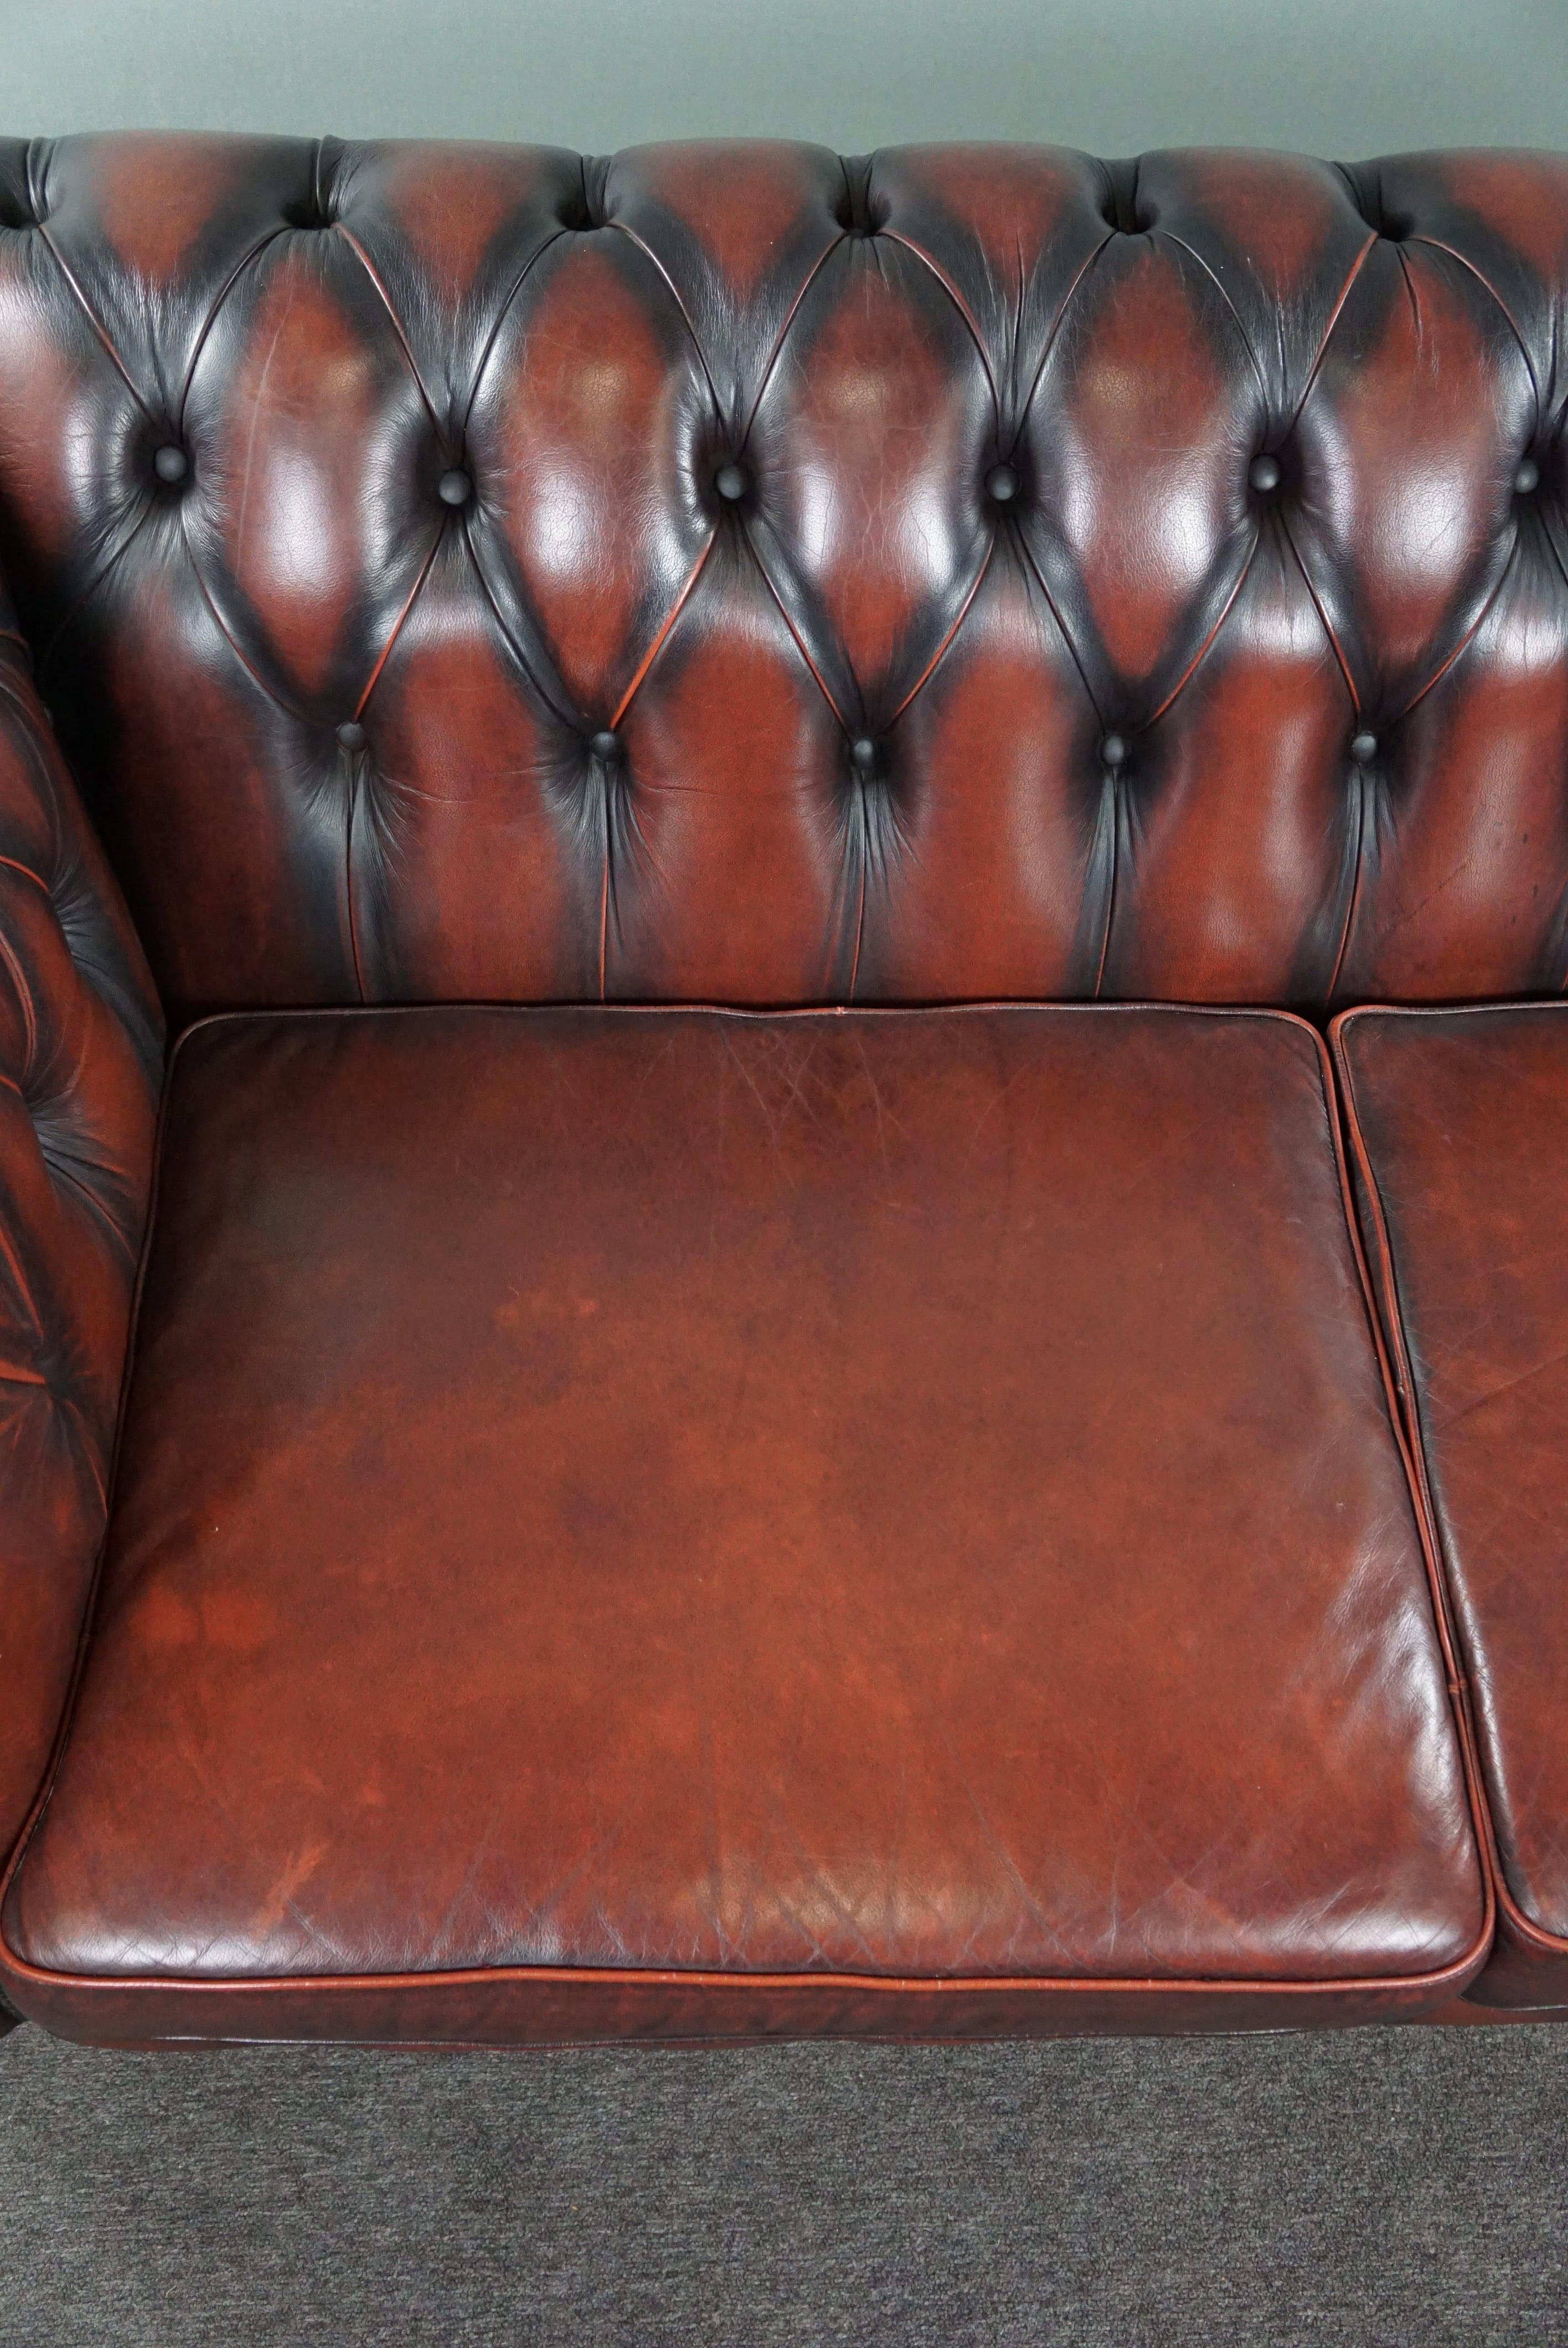 Cowhide Insanely colored red cow leather Chesterfield sofa, spacious 2 seater For Sale